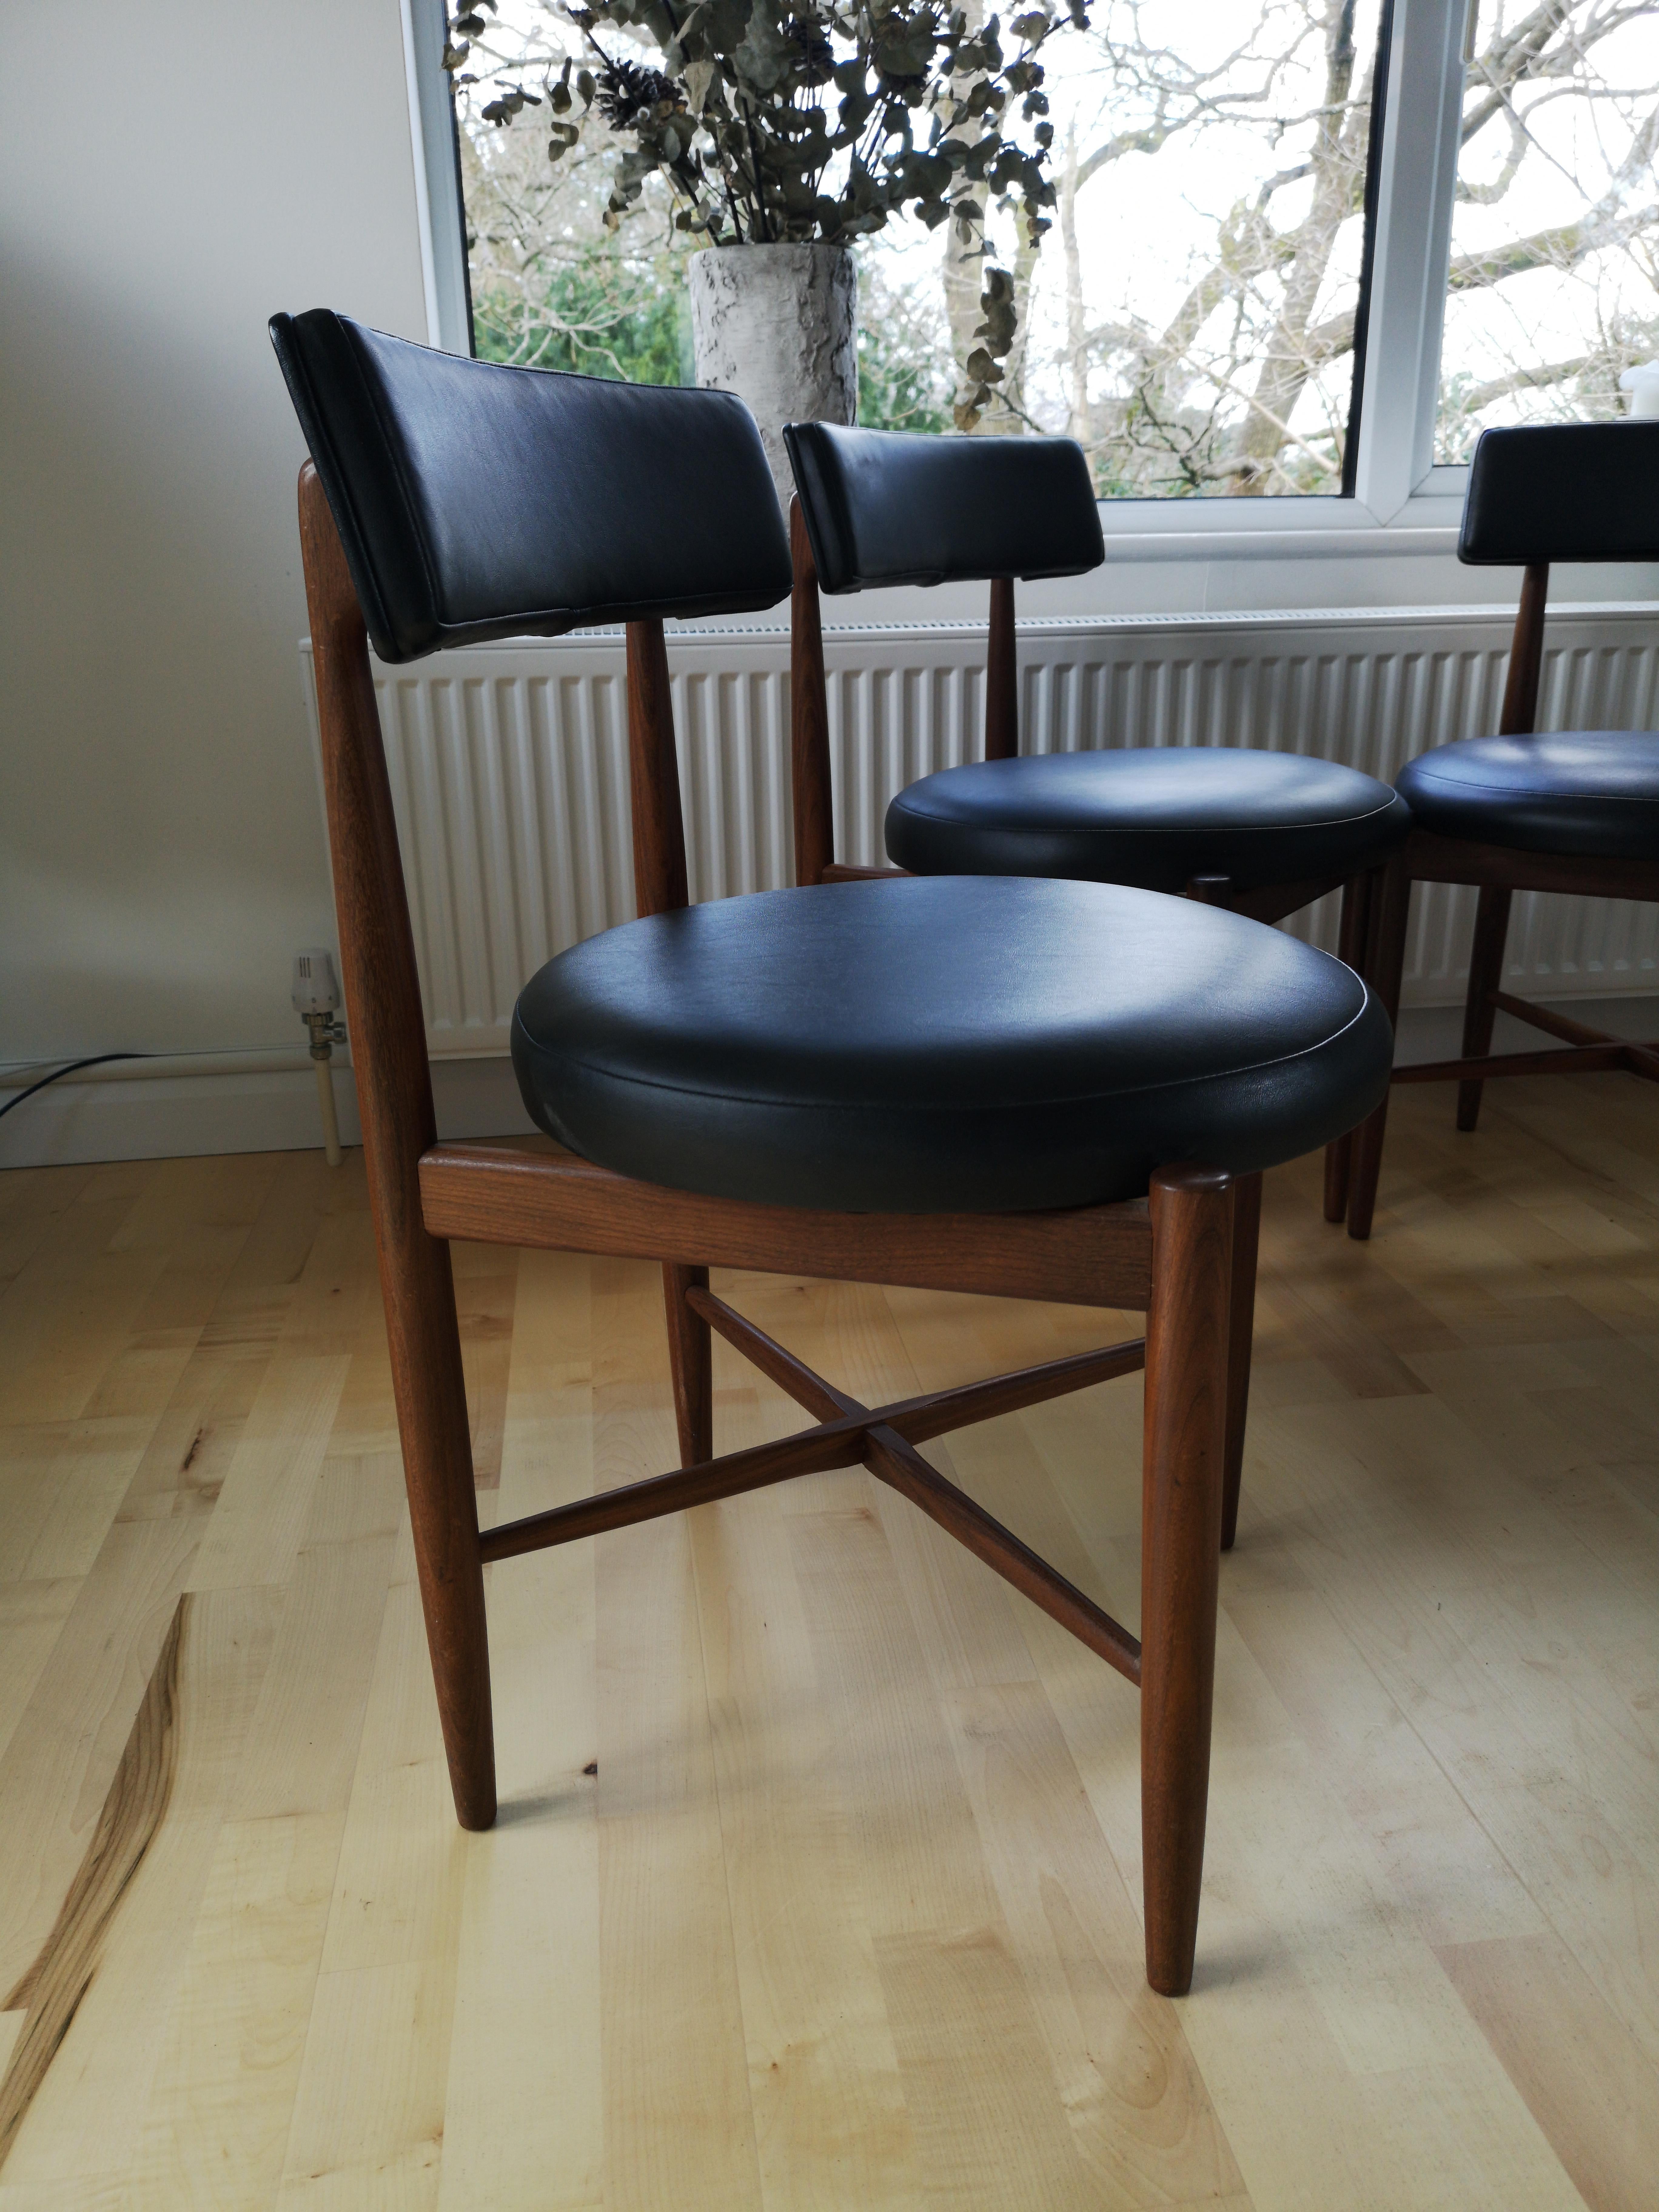 Midcentury Teak and Black Vinyl Dining Chairs by Victor Wilkins for G-Plan 1